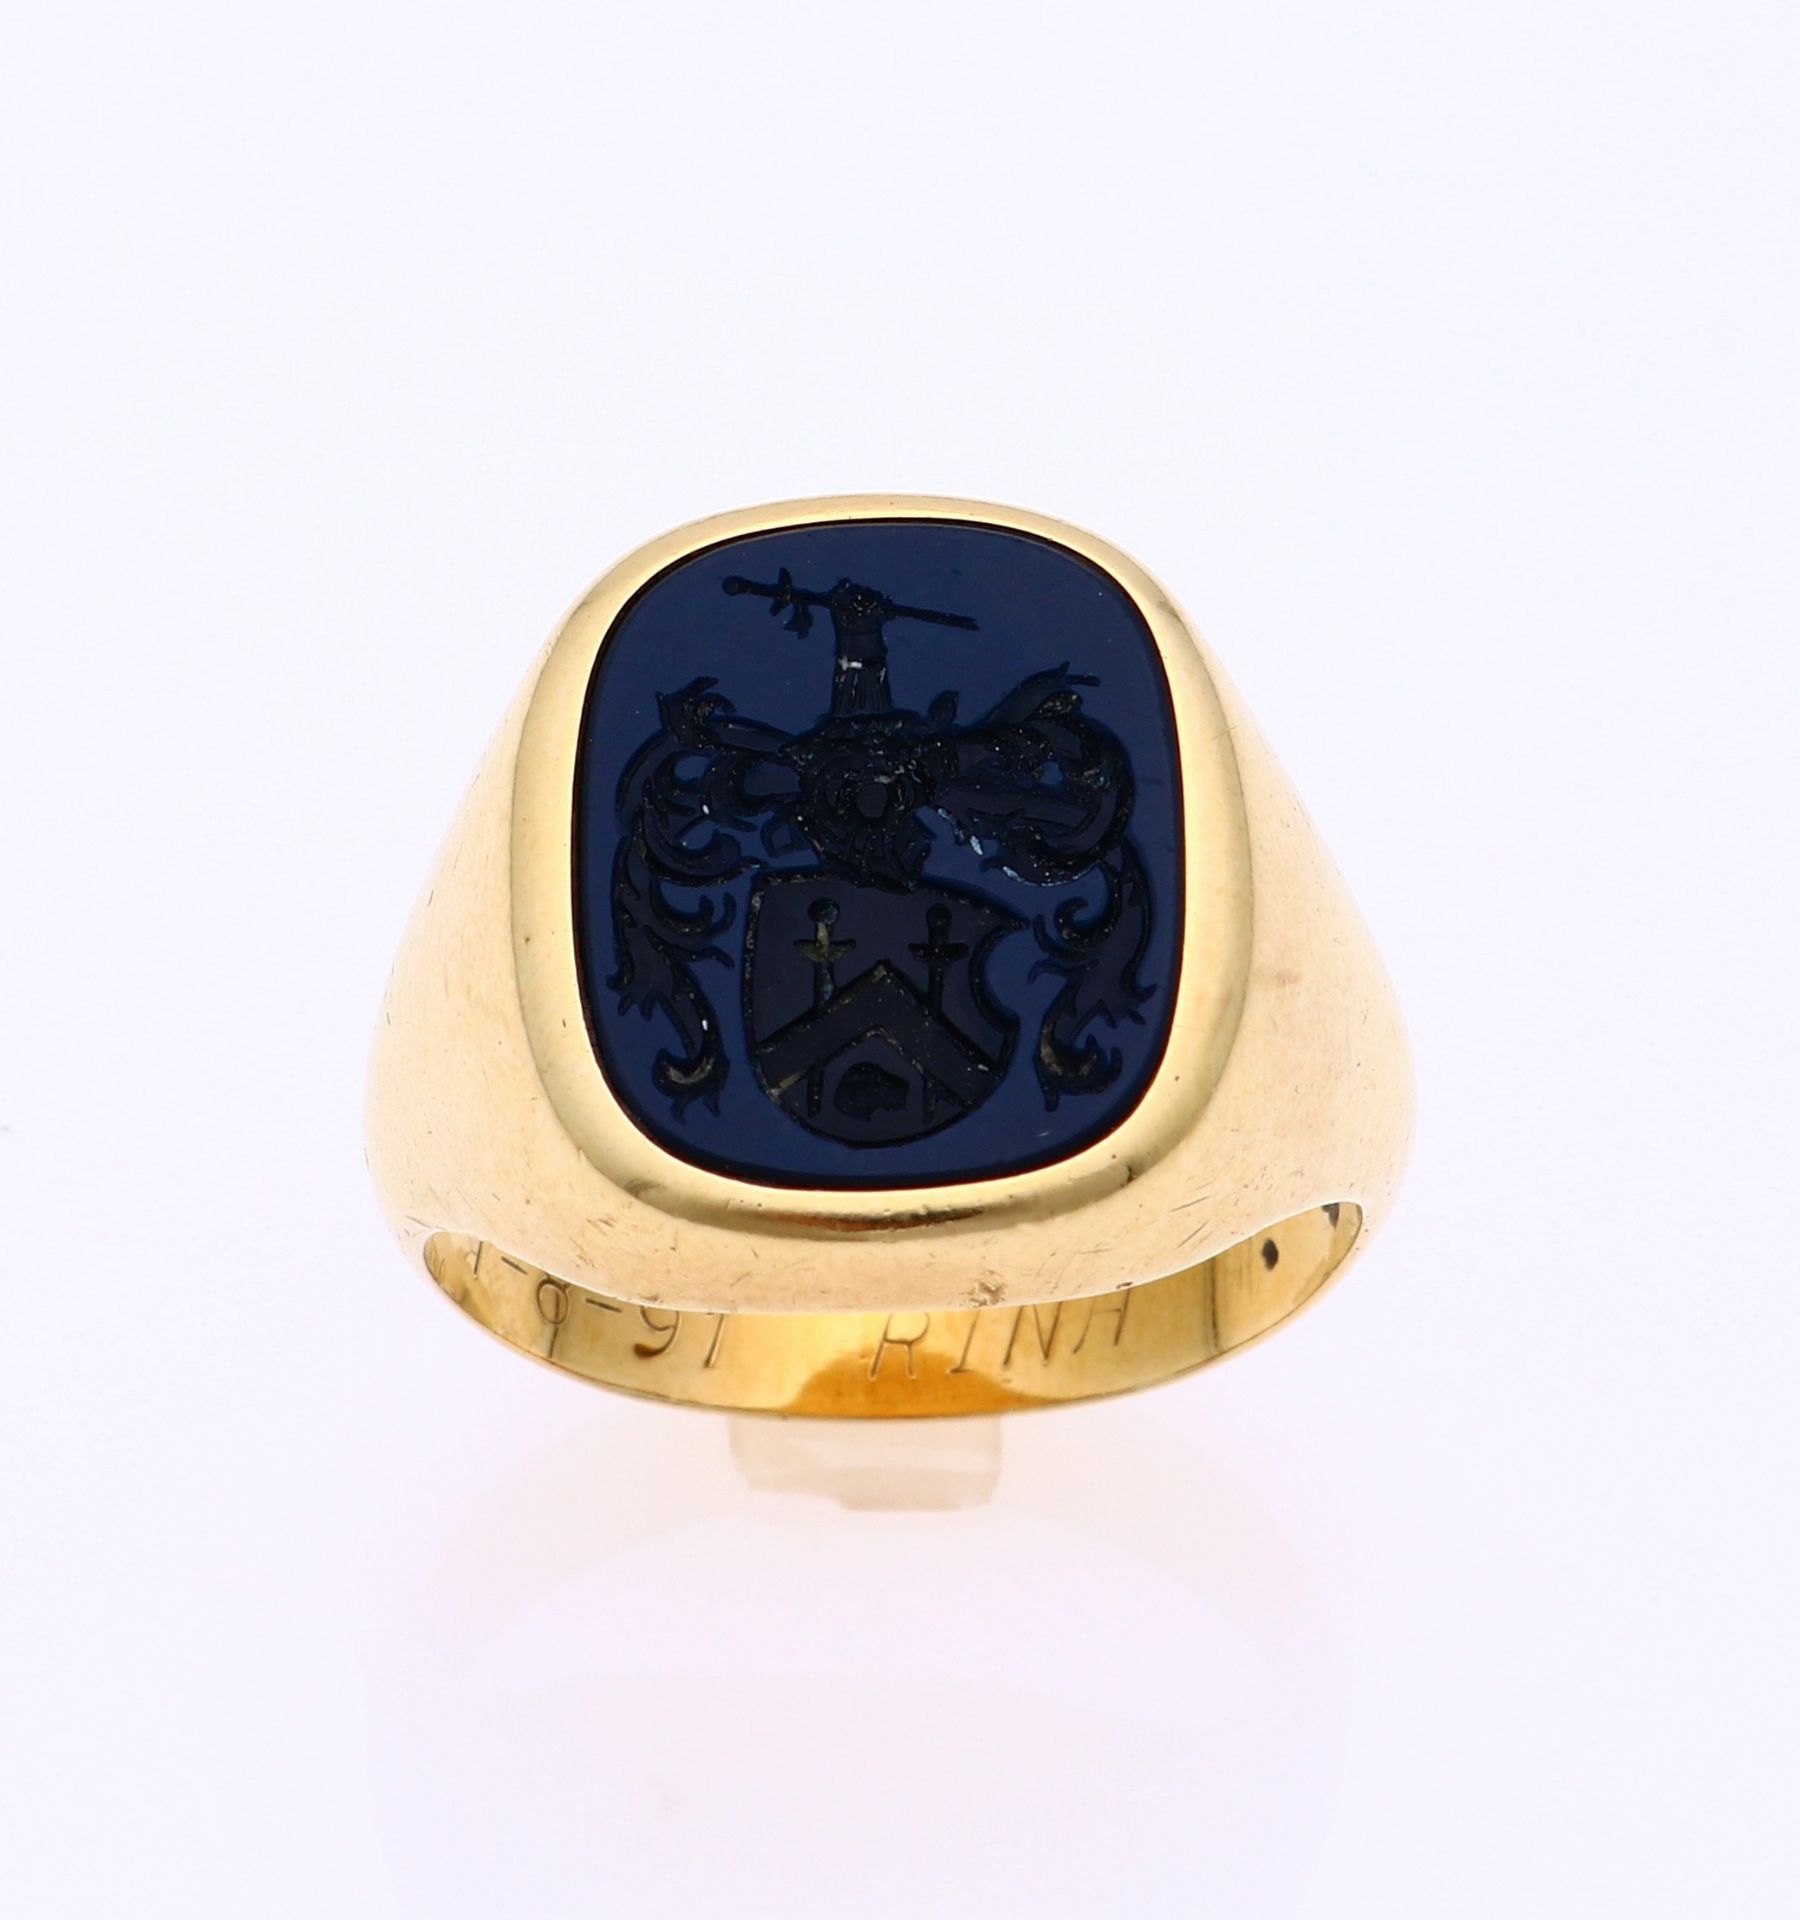 Gold men's ring with coat of arms